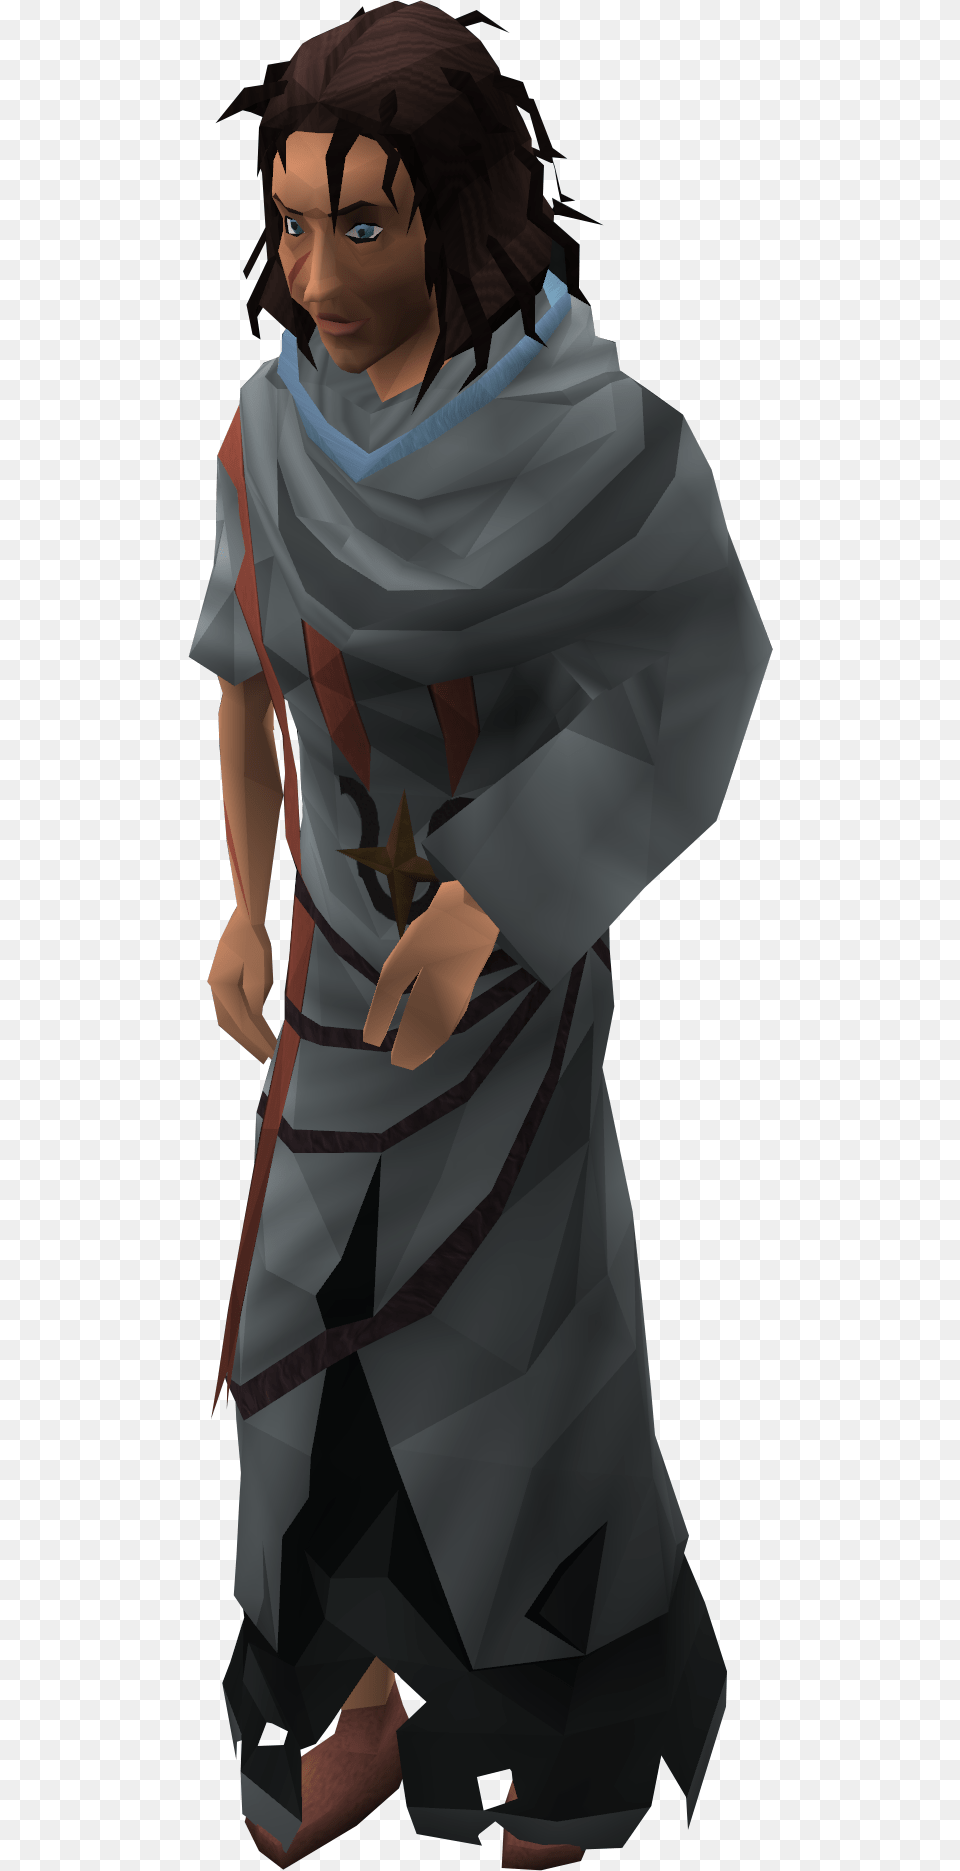 The Runescape Wiki Cocktail Dress, Formal Wear, Clothing, Fashion, Gown Png Image